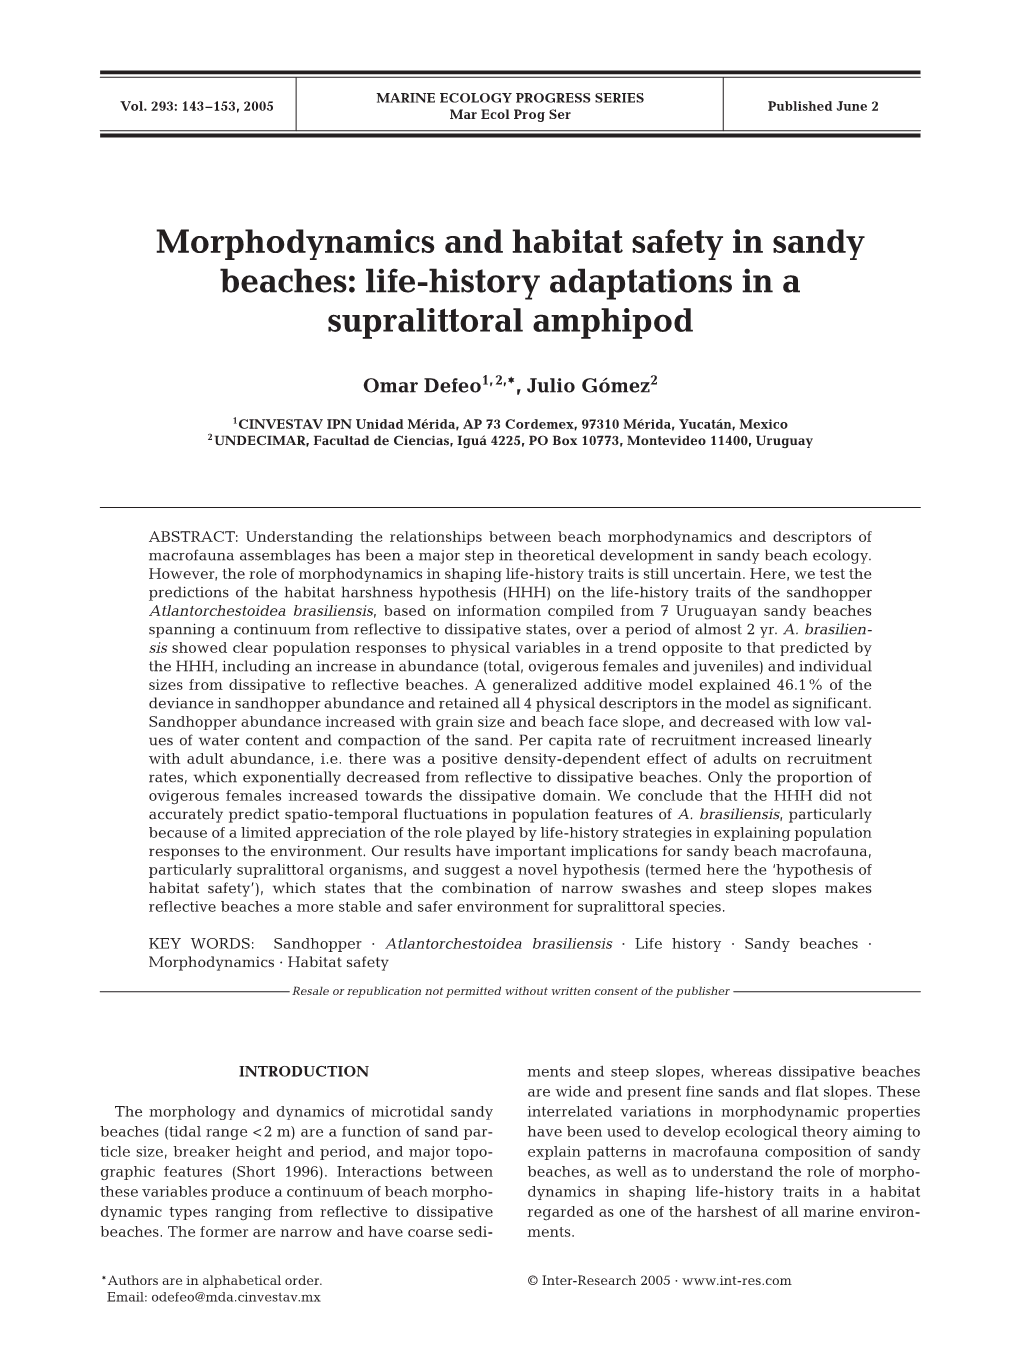 Morphodynamics and Habitat Safety in Sandy Beaches: Life-History Adaptations in a Supralittoral Amphipod